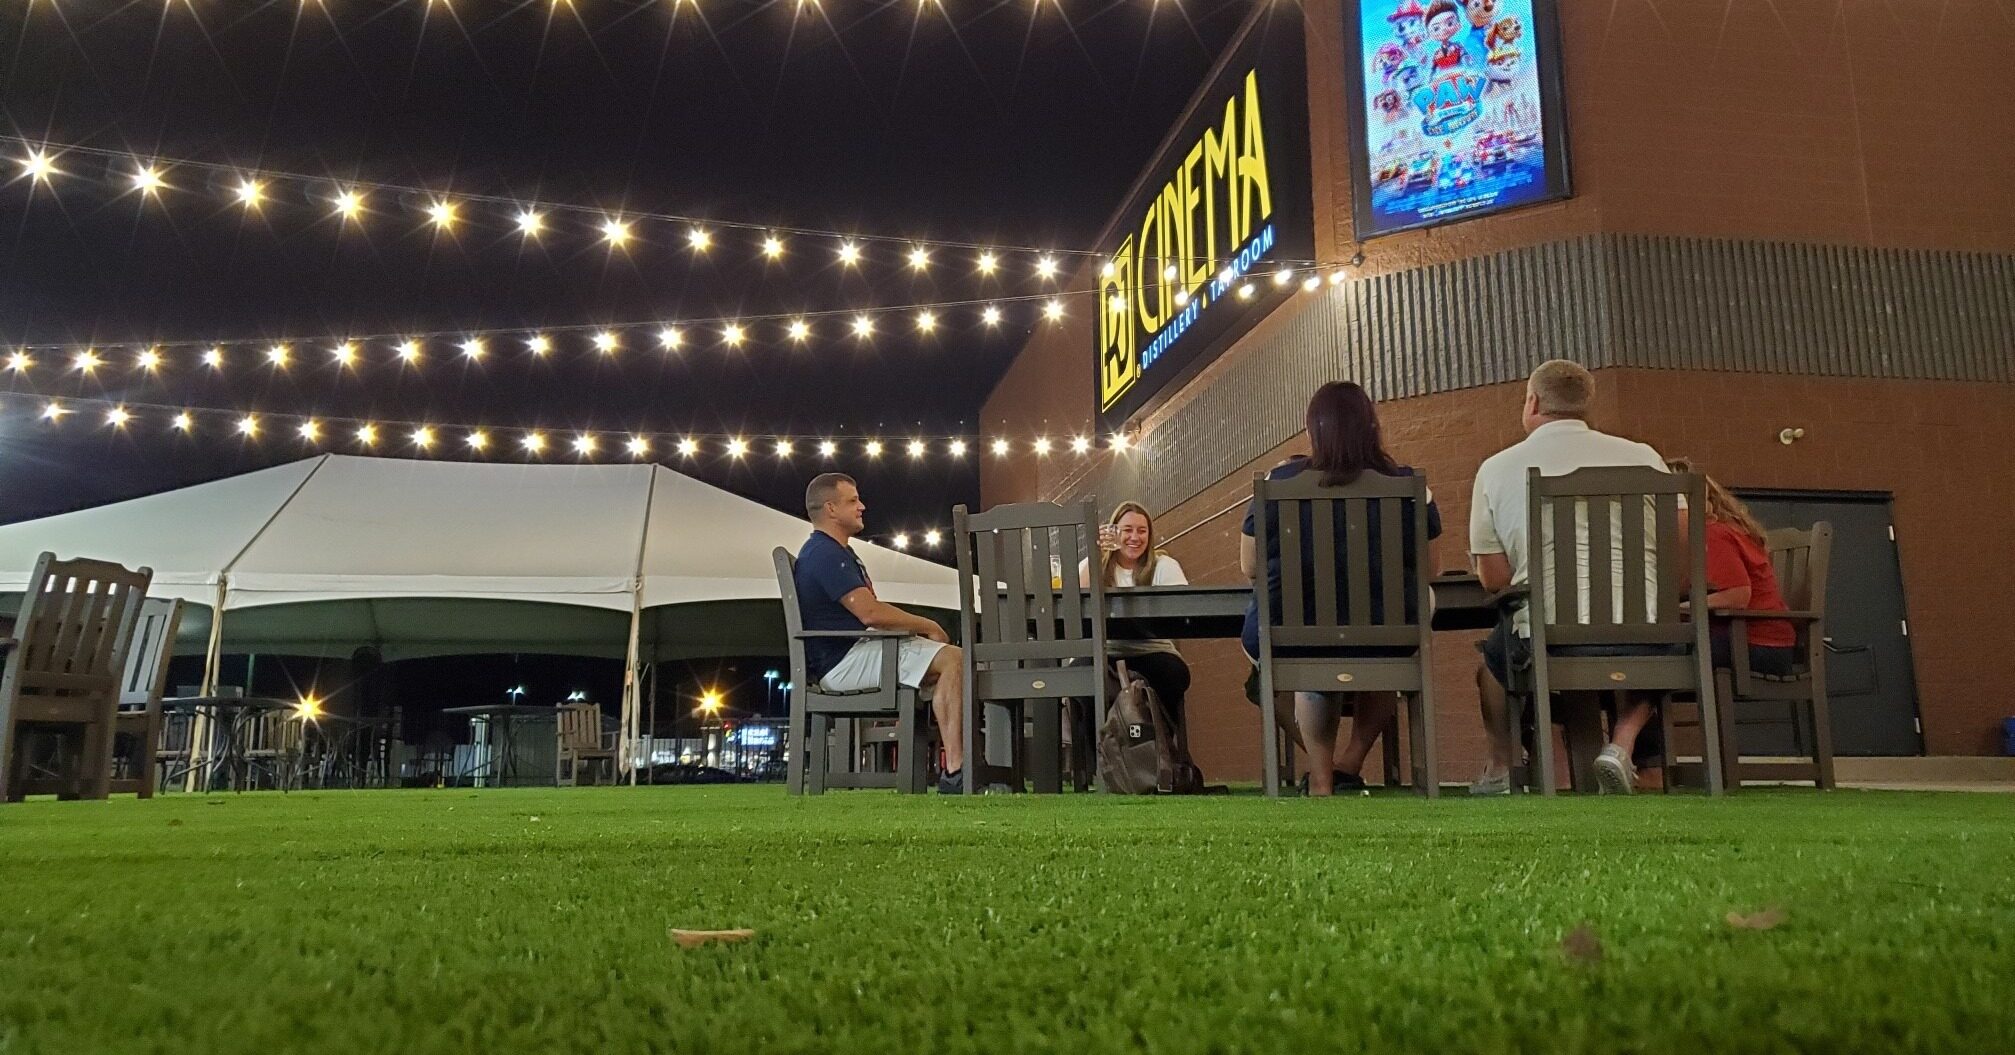 Outdoor seating in a large lawn outside of RJ Cinema along the Lewis and Clark Historic Trail